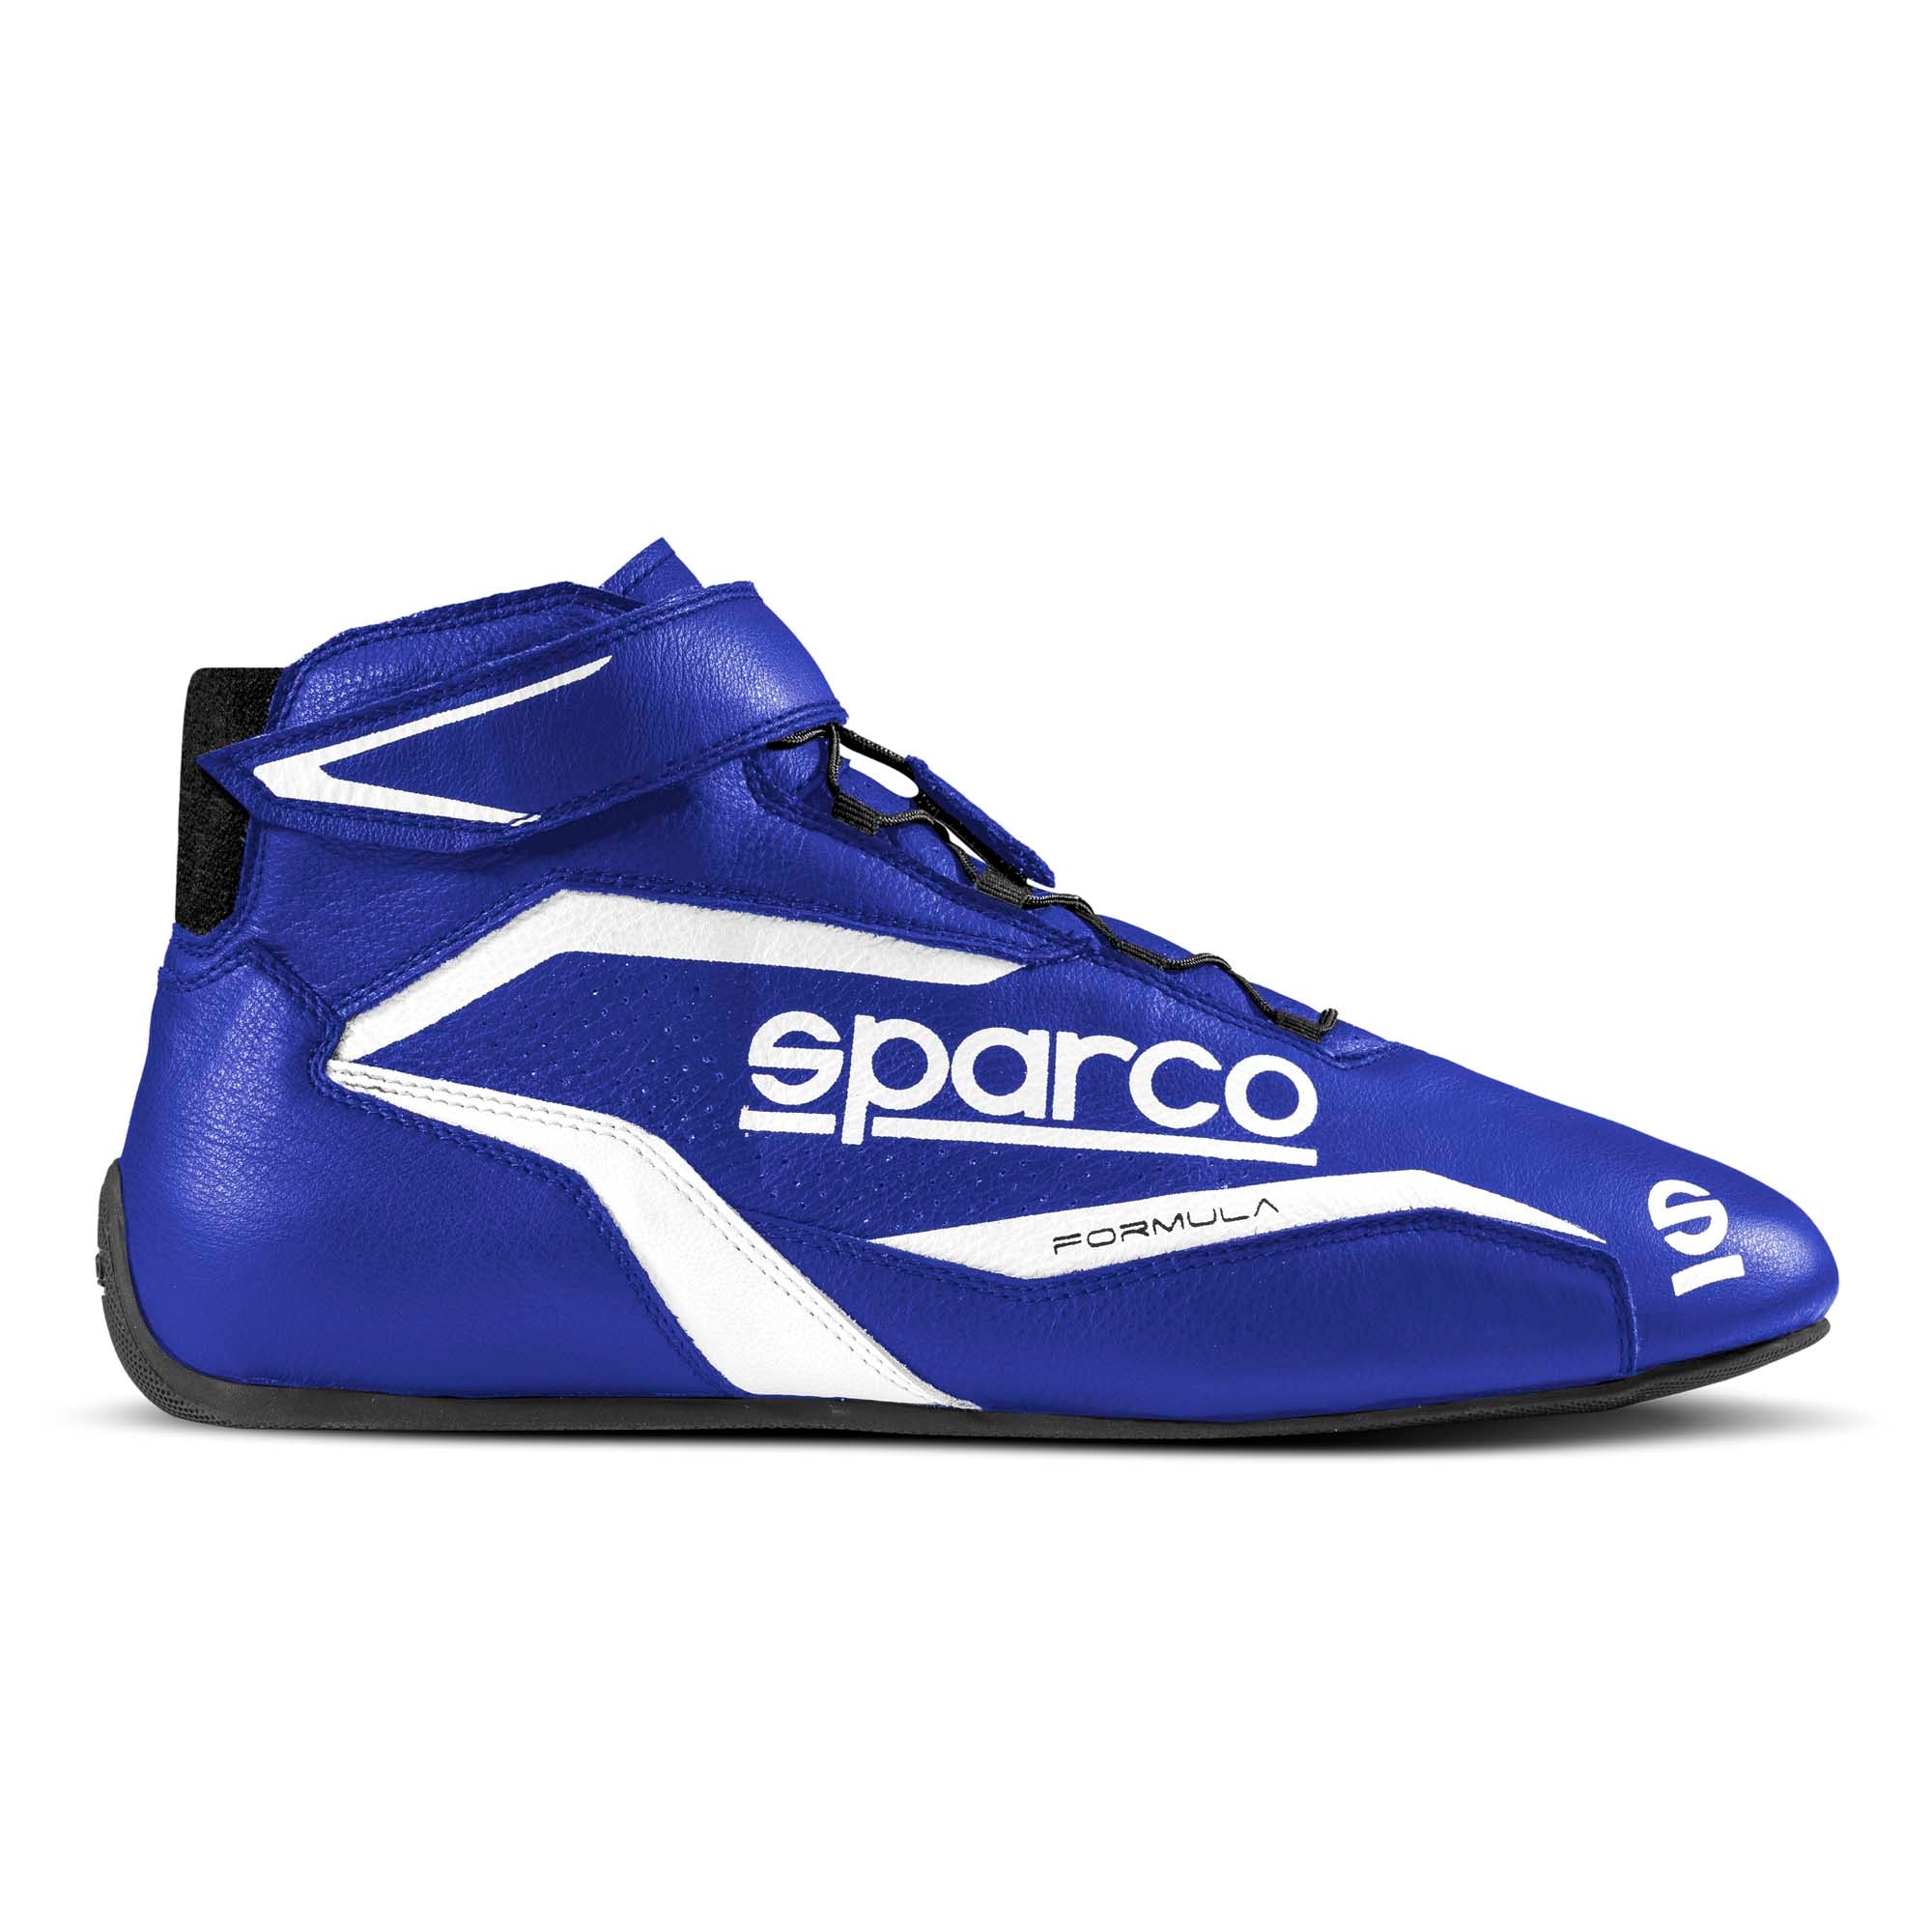 Sparco Formula Racing Shoes - Blue/White